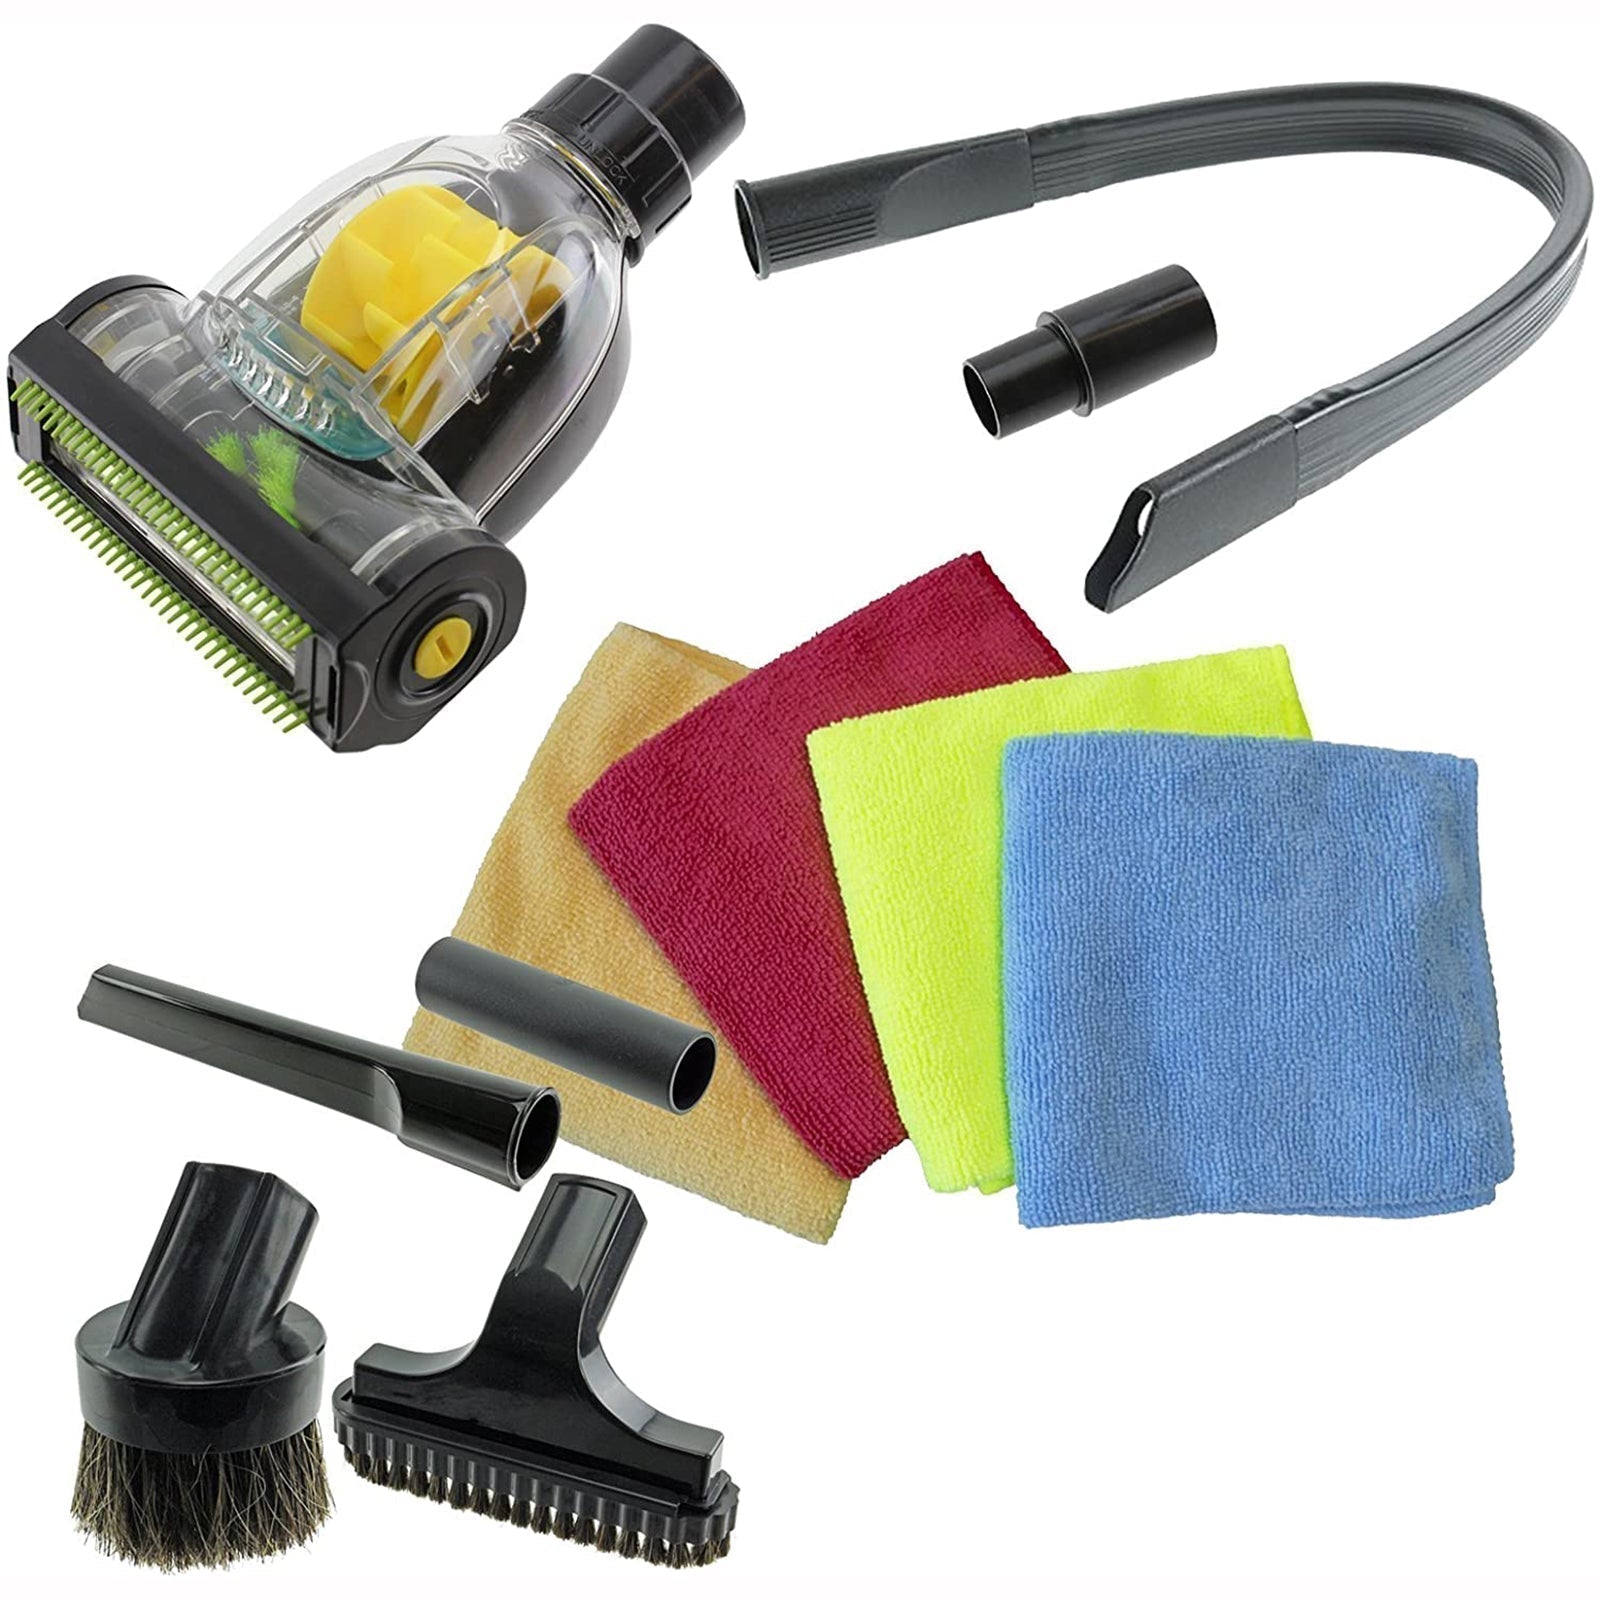 Car Valet Cleaning Tool Kit compatible with NUMATIC Vacuum Cleaner (32mm/35mm)